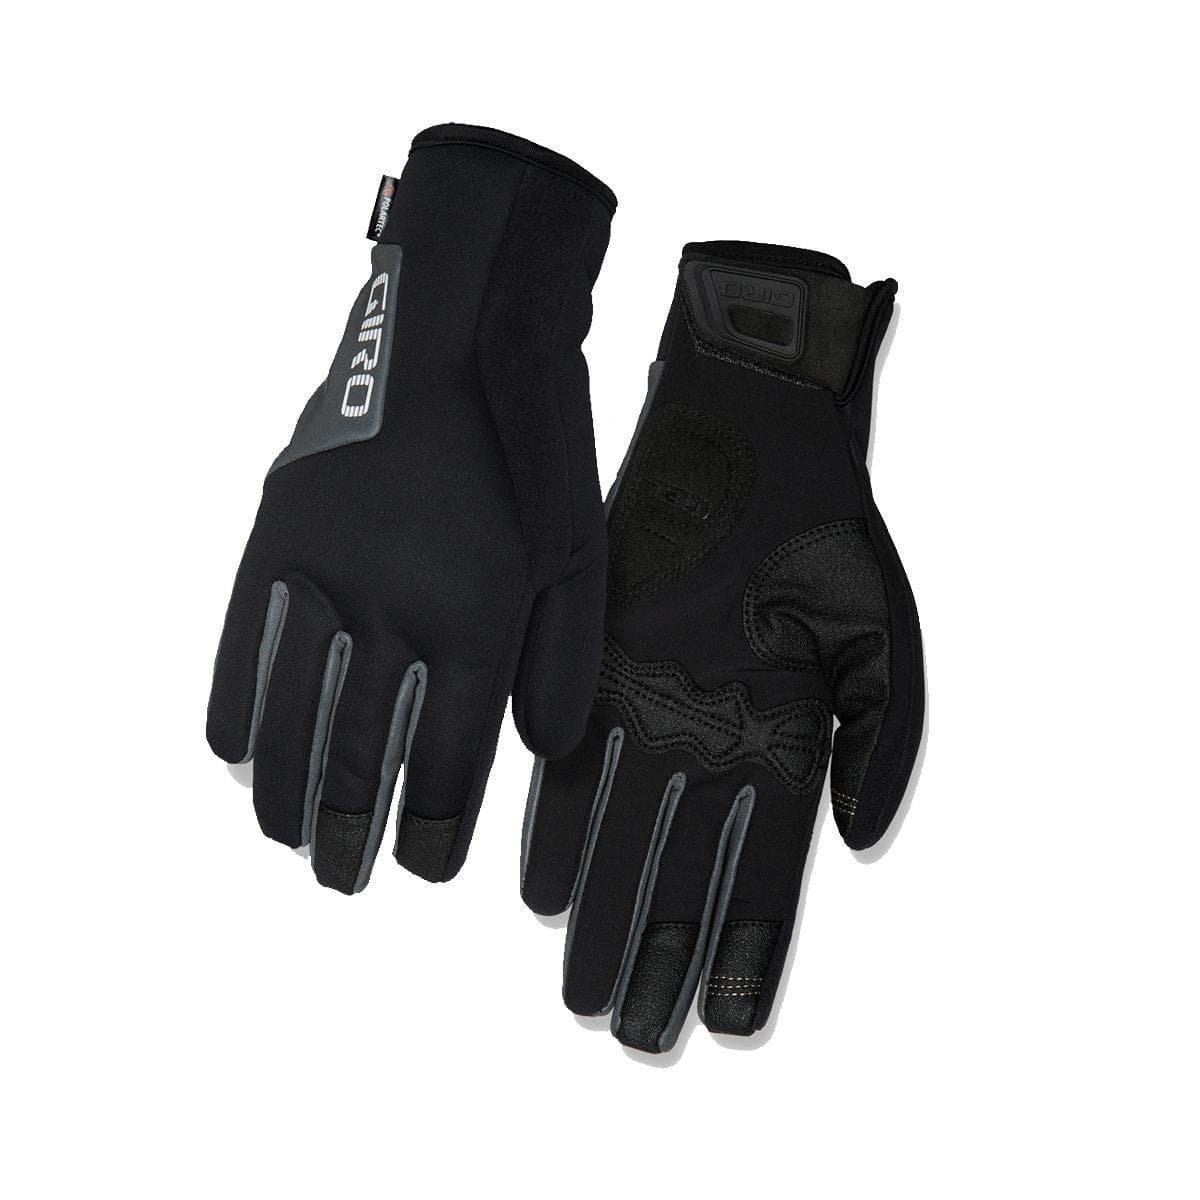 Giro Wm Candela 2.0 Water Resistant Insulated Windbloc Cycling Gloves 2017: Black S